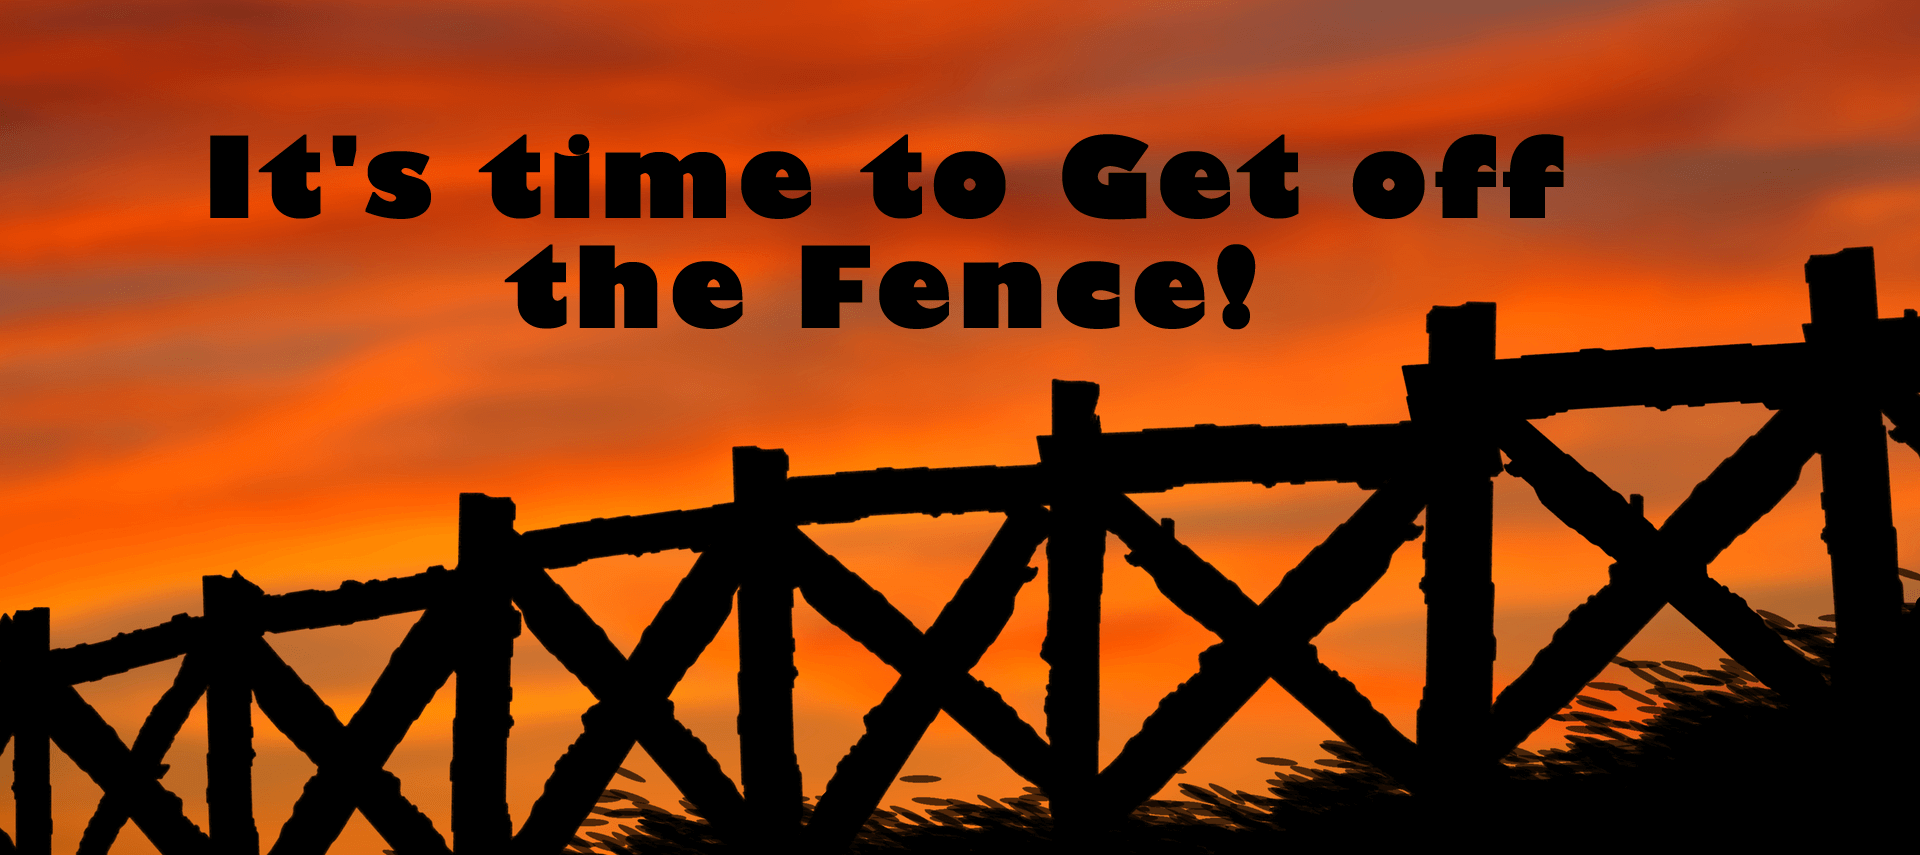 Black fence against a blazing red sunset with text: It's time to get off the fence.